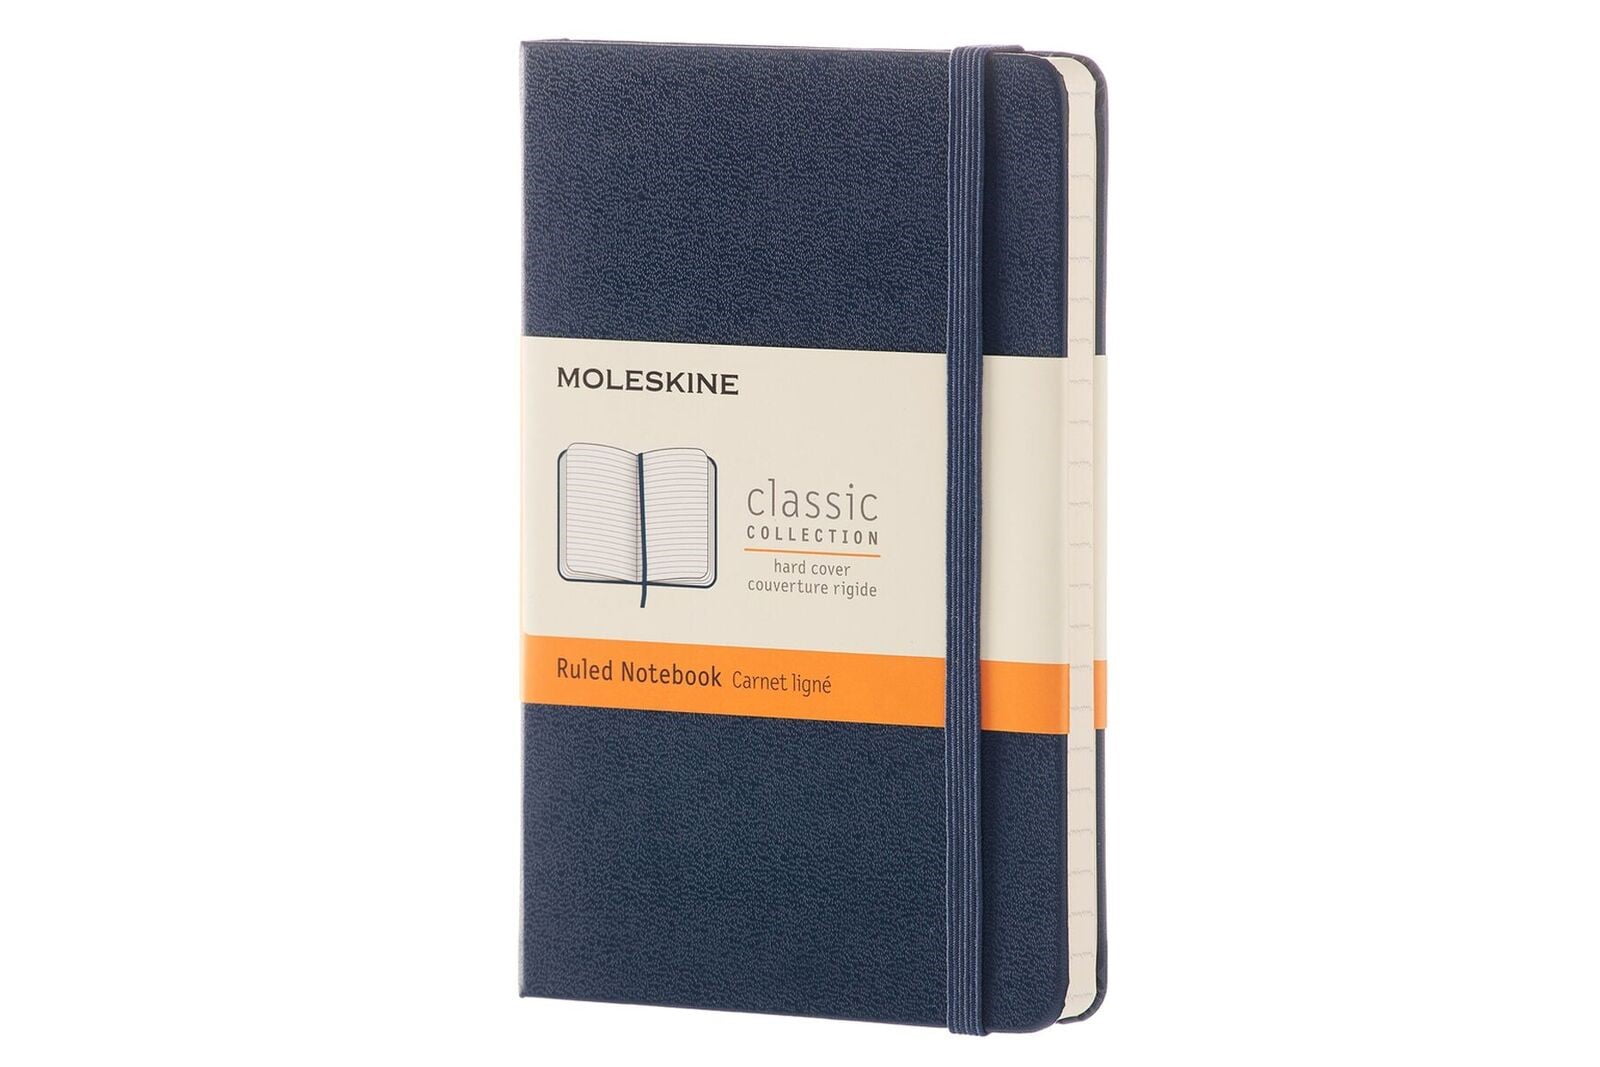 5" x 8.25" Moleskine Classic Notebook,Hard Cover,Large Ruled/Lined,Sappire Blue 